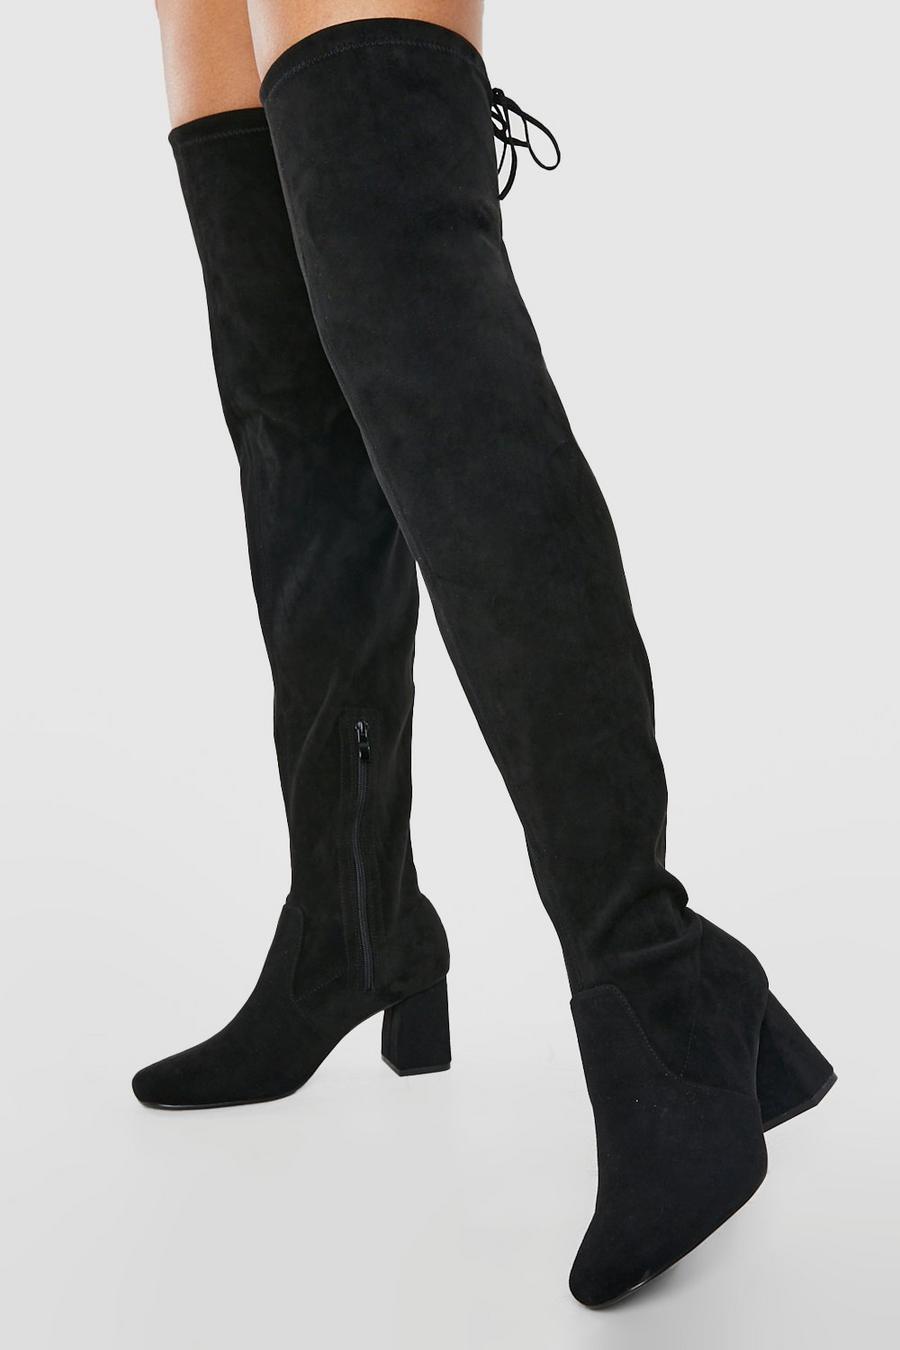 Black Wide Width Over The Knee Block Heeled Boots image number 1